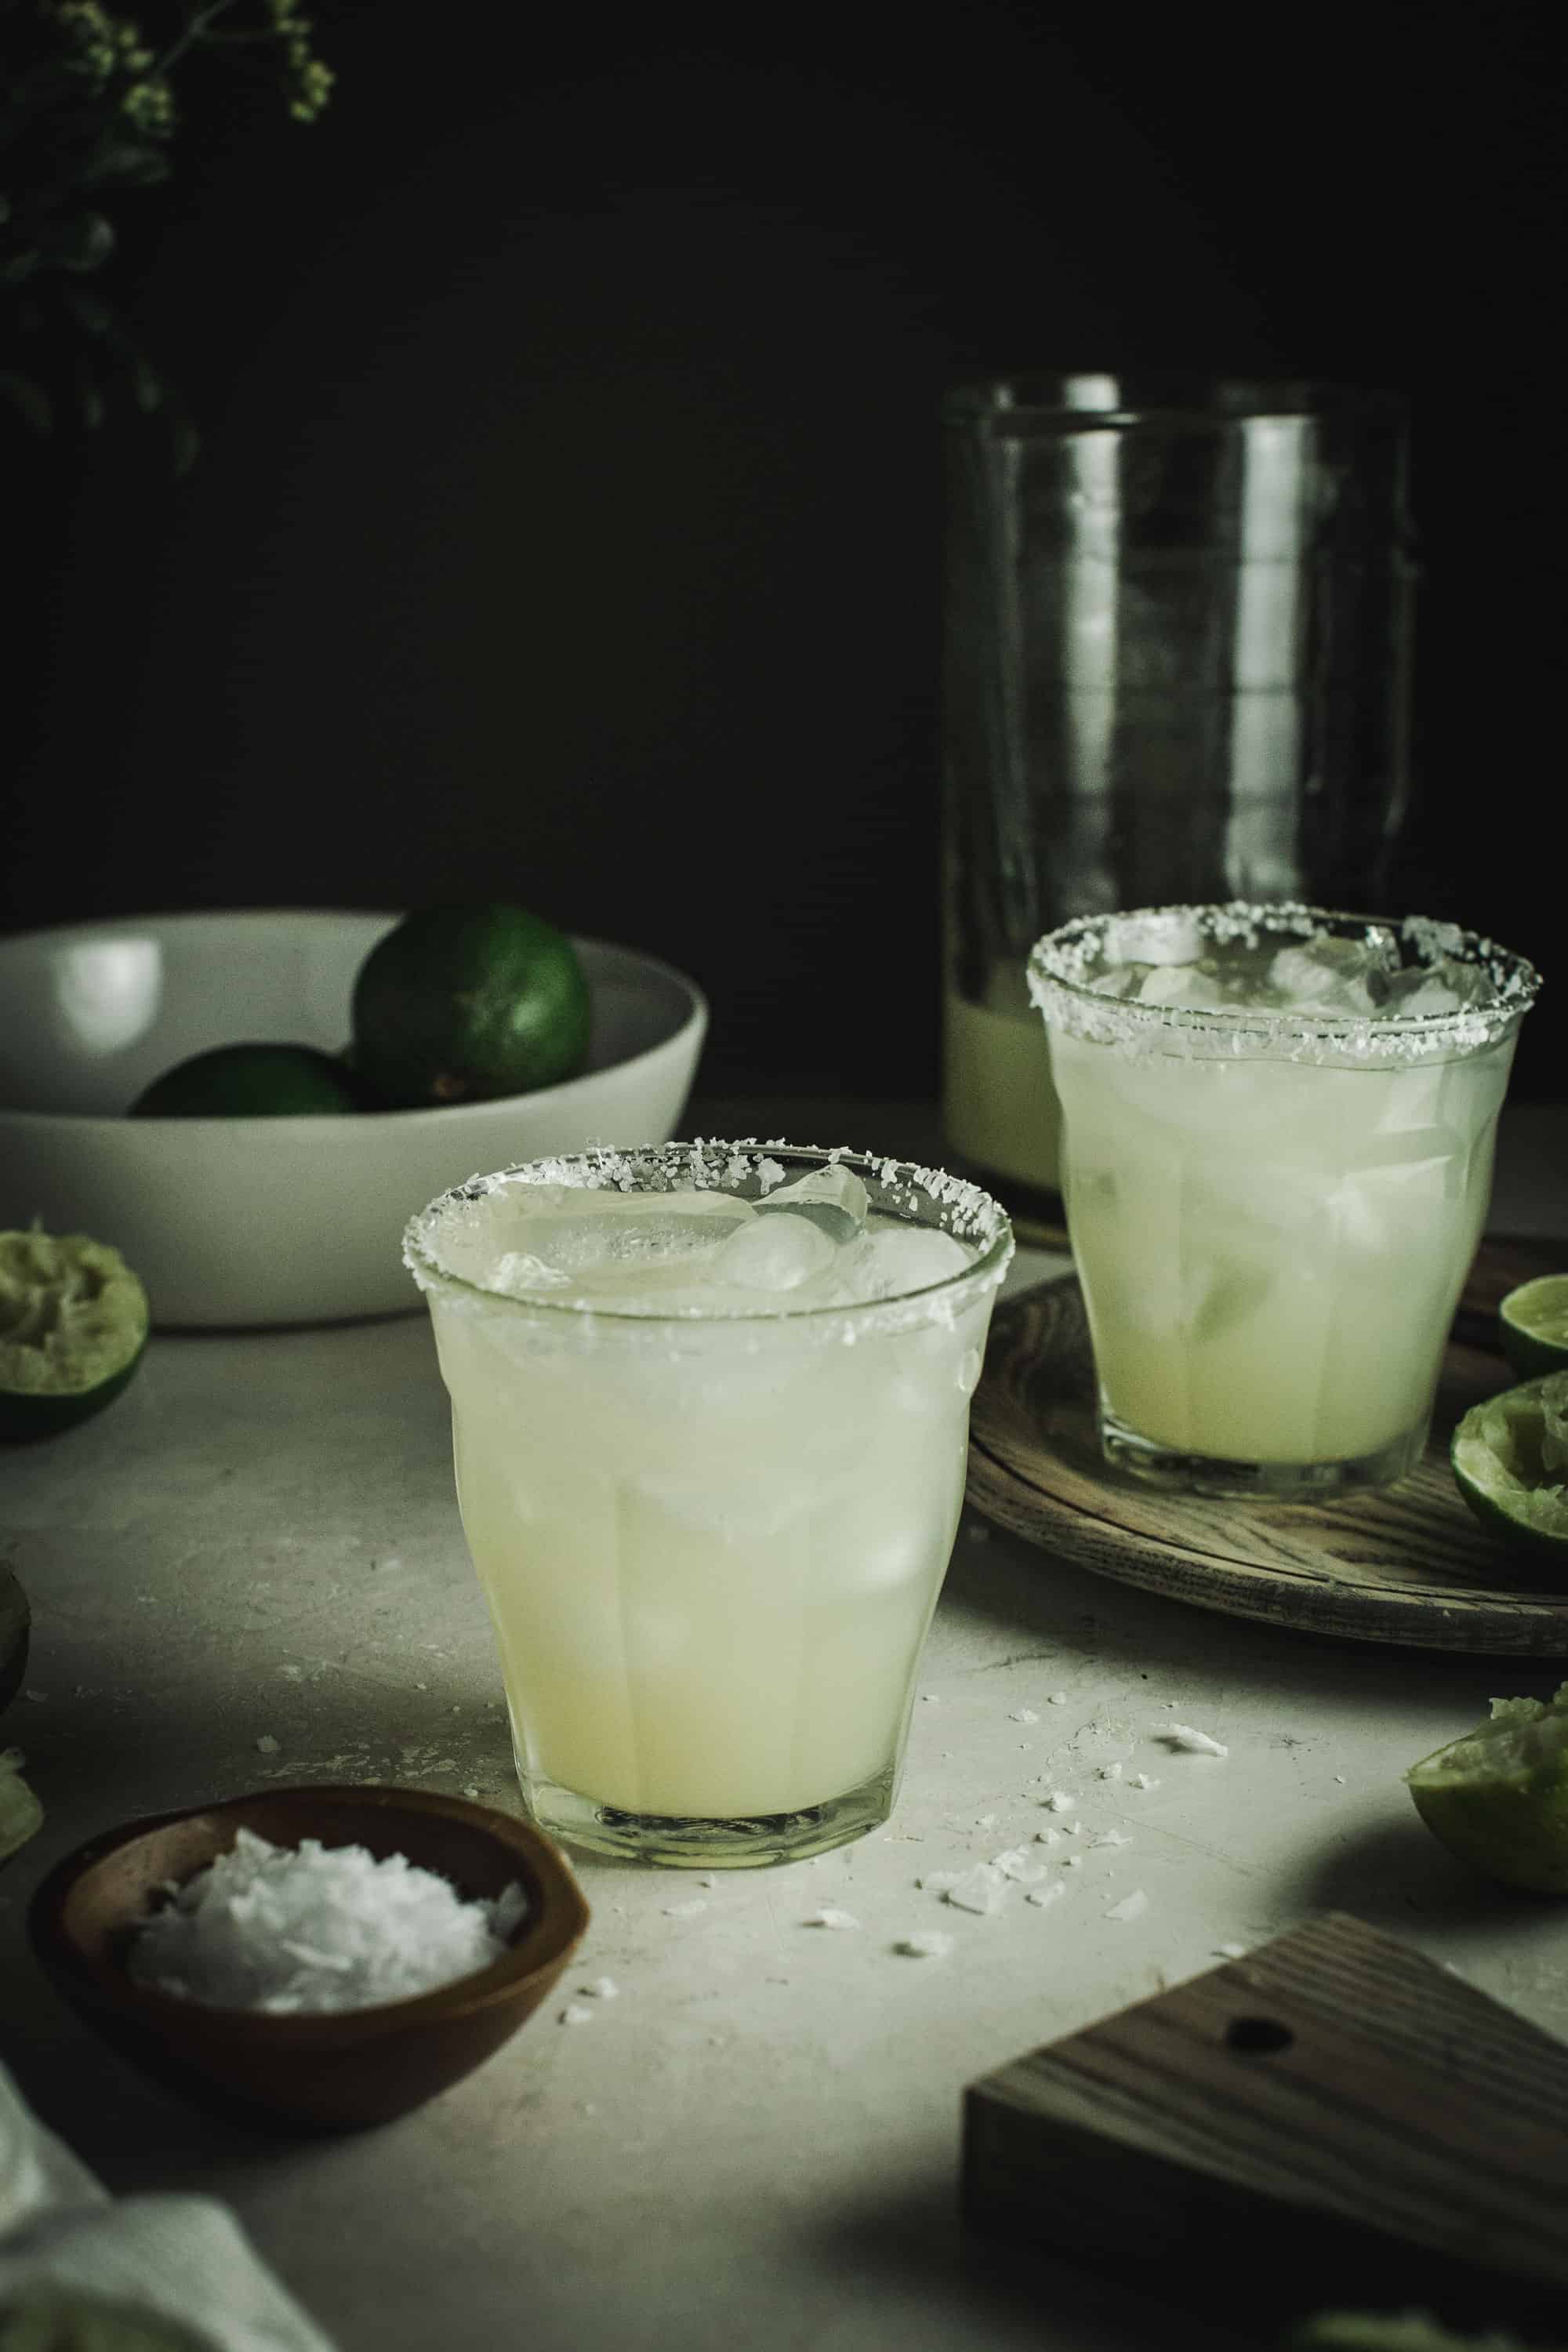 Margaritas in two glasses with salted rim and a bowl of limes behind.